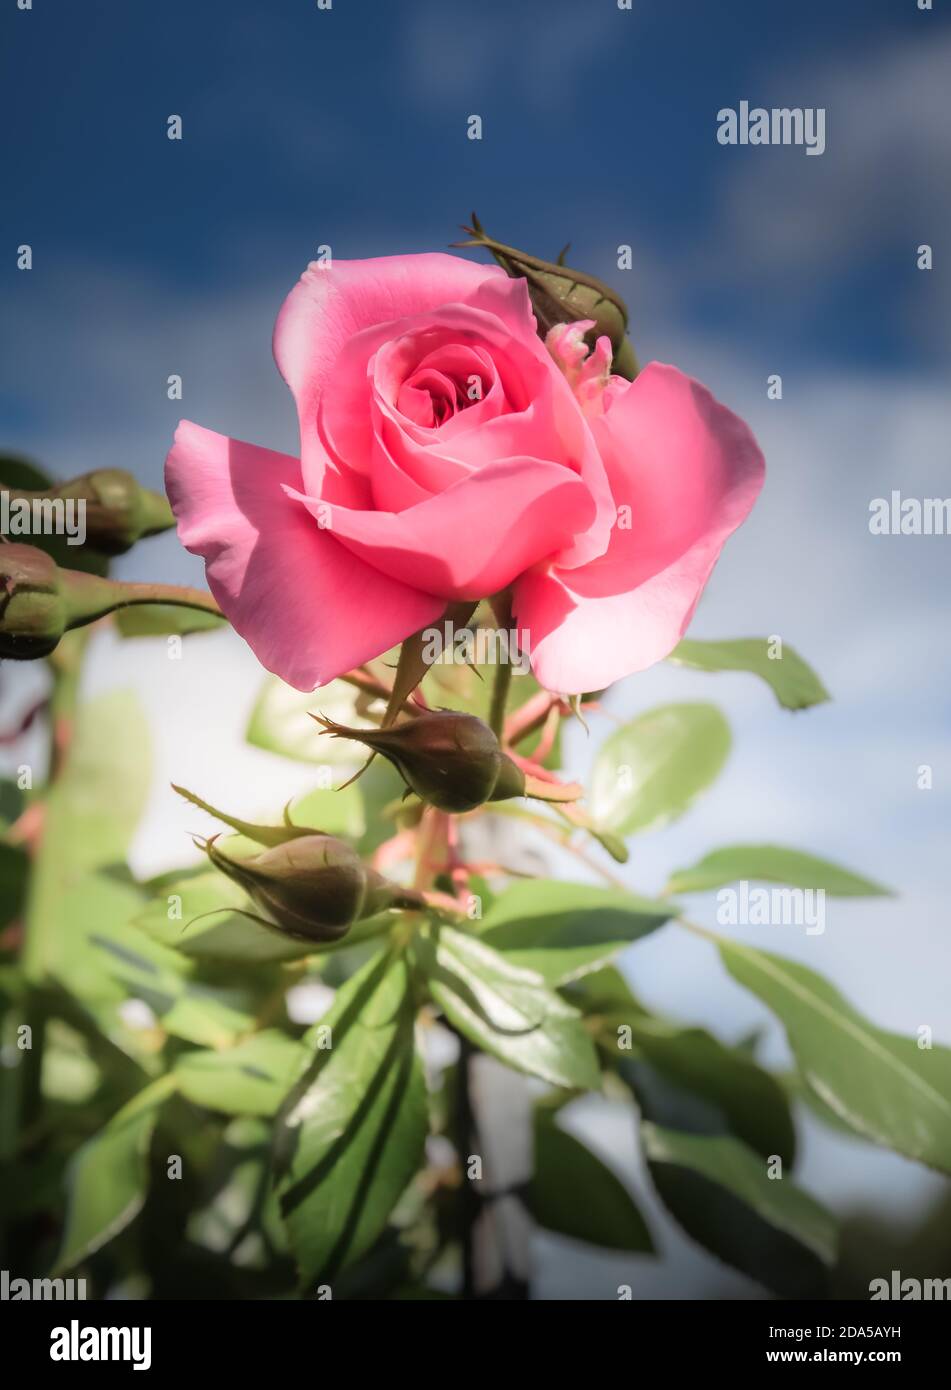 An uplifting view of a single fully bloomed Queen Elizabeth pink rose with buds and stems against a distant blue sky with soft out of focus clouds Stock Photo